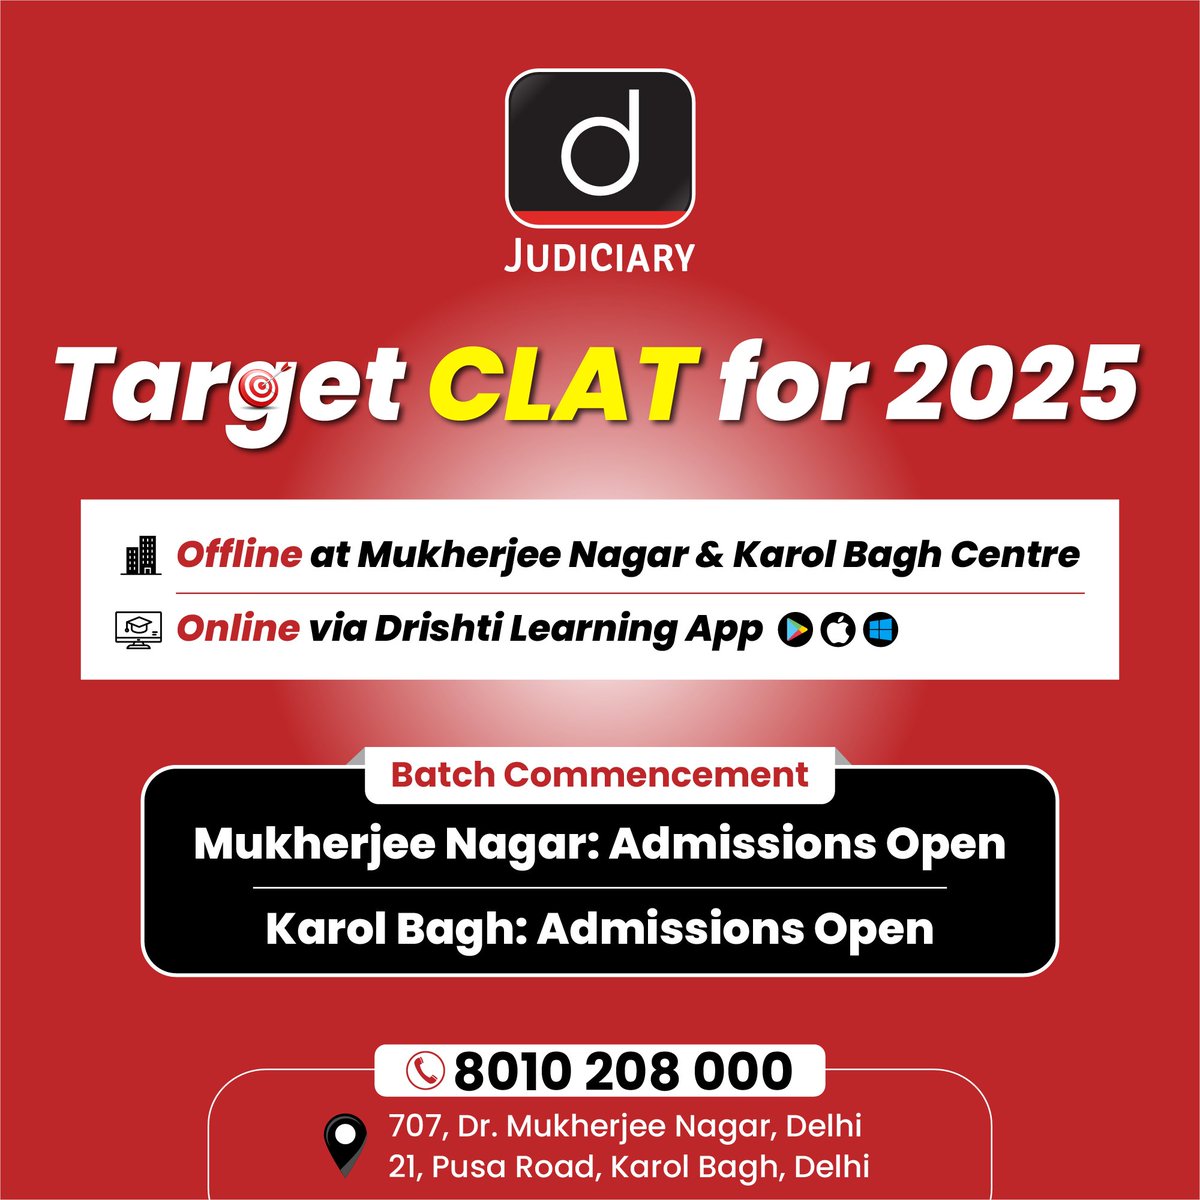 Join the path to legal excellence with our Target CLAT 2025 program!

Check the link: drishti.xyz/CLAT2025

#CLAT #JudicialServices #NewBatch #Law #Learning #LawStudents #India #IndianJudiciary #LegalStudies #Constitution #Aspirants #TeamDrishti  #DrishtiJudiciary